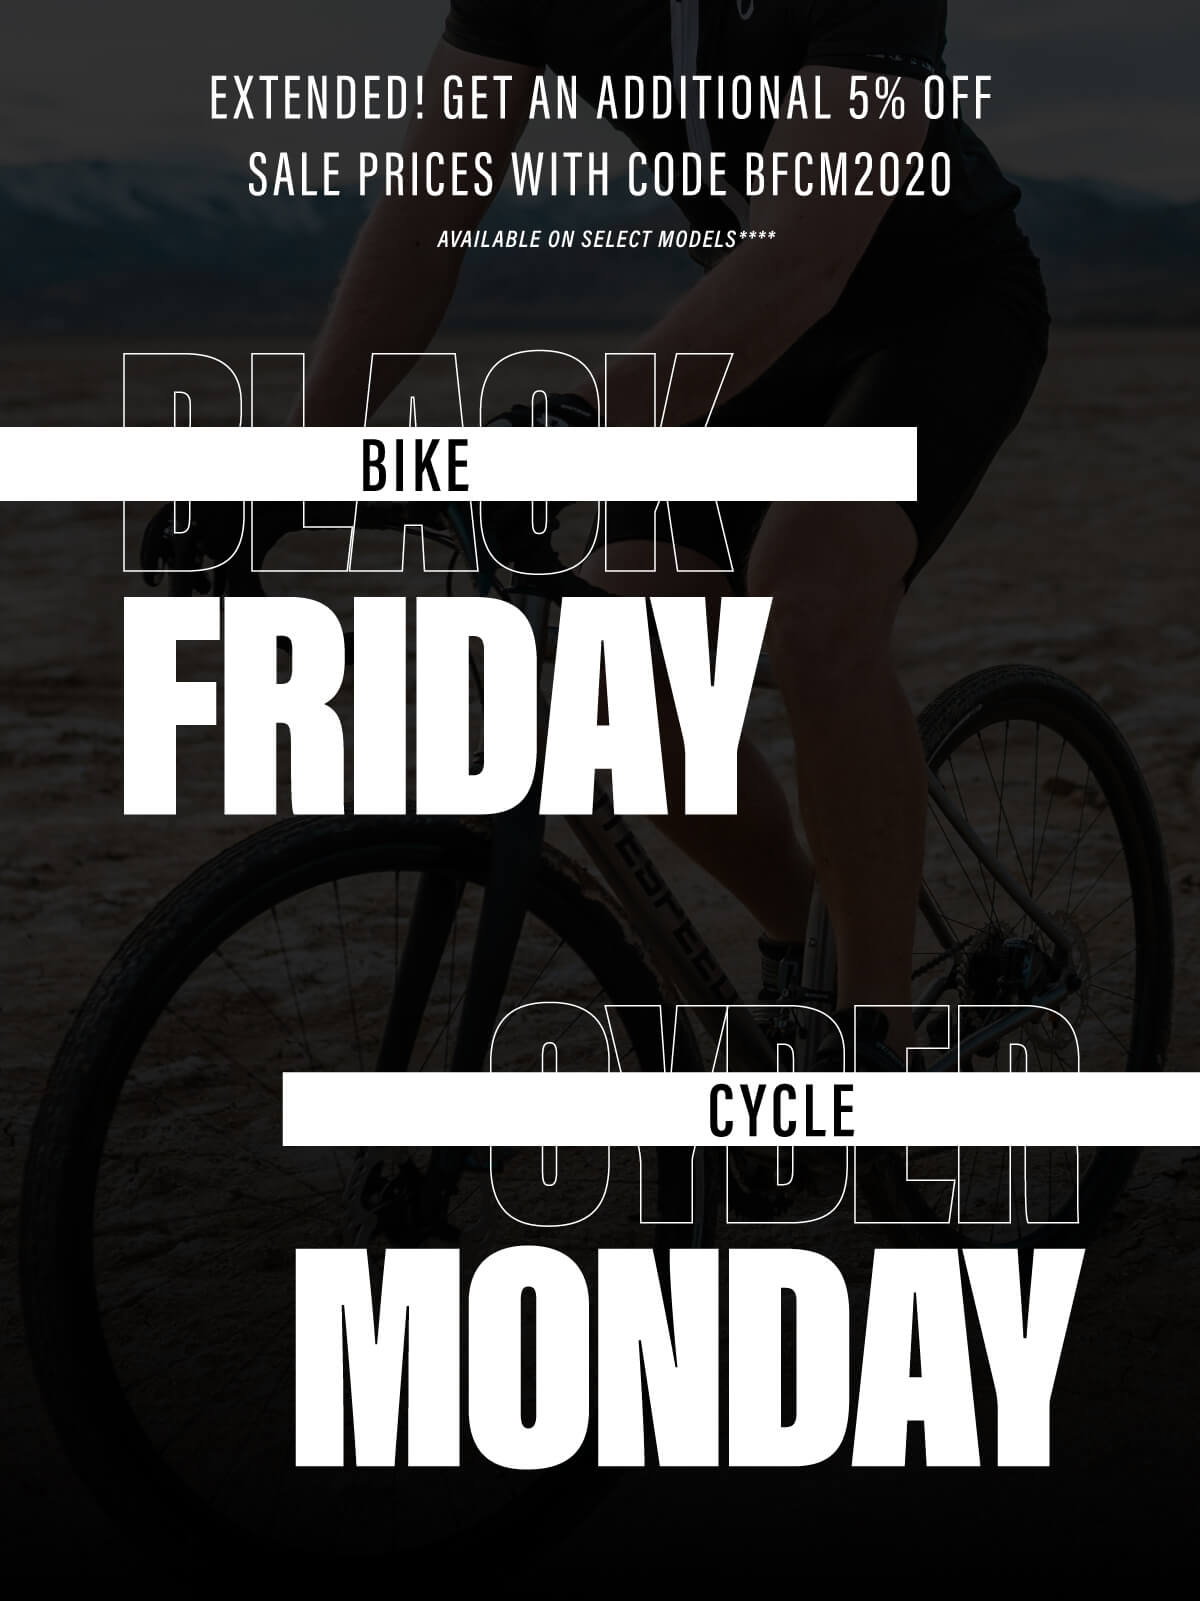 Today Only! Extended! Get an additional 5% off sale prices with code BFCM2020. Bike Friday, Cycle Monday Sale